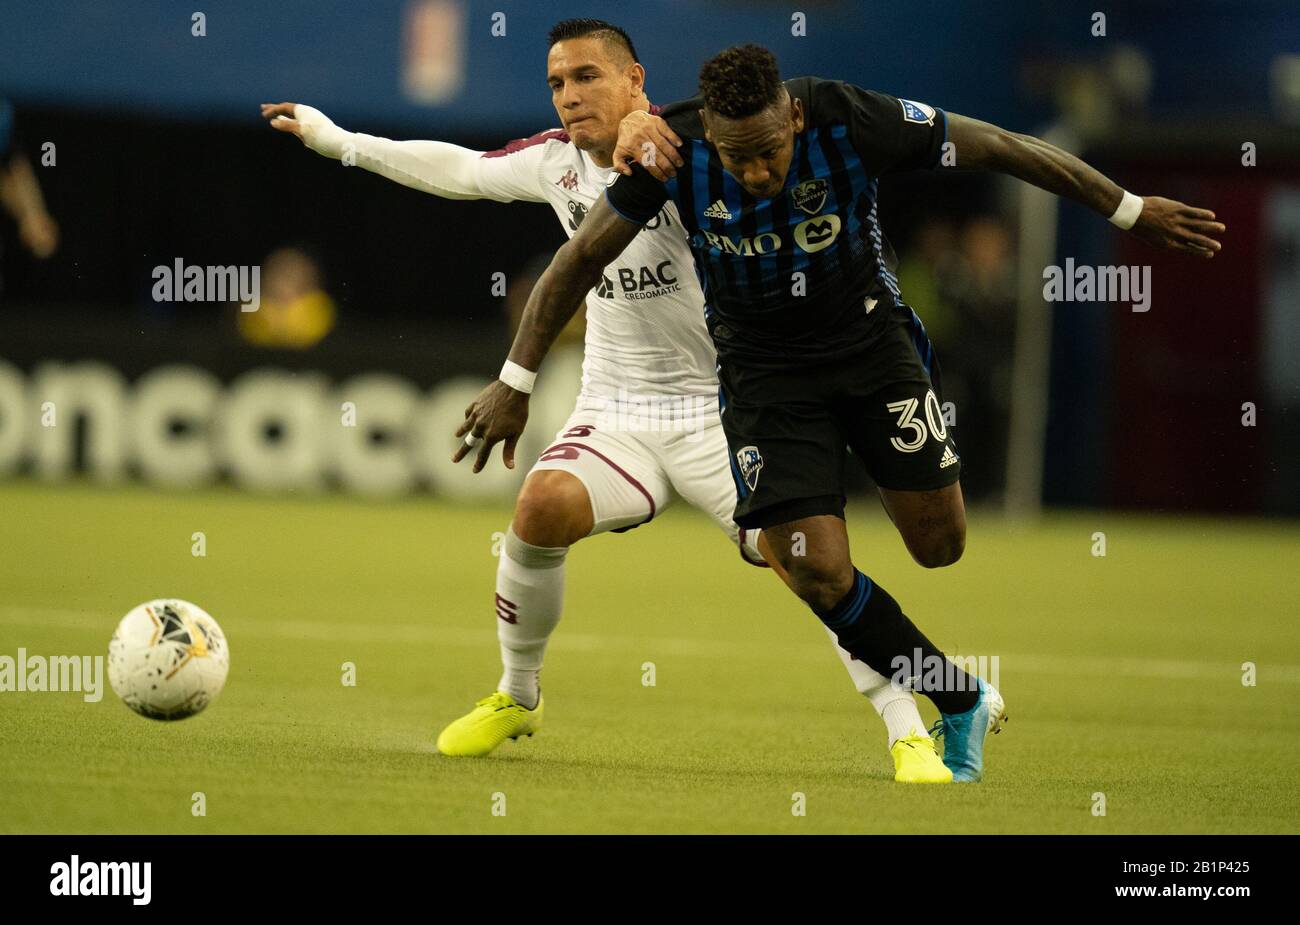 Montreal, Quebec, Canada. 26th Feb, 2020. Montreal Impact #30 Romell Quioto and Deportivo Saprissa #8 David Guzmán during the first half in a CONCACAF Champions League soccer match. Credit: Patrice Lapointe/ZUMA Wire/Alamy Live News Stock Photo